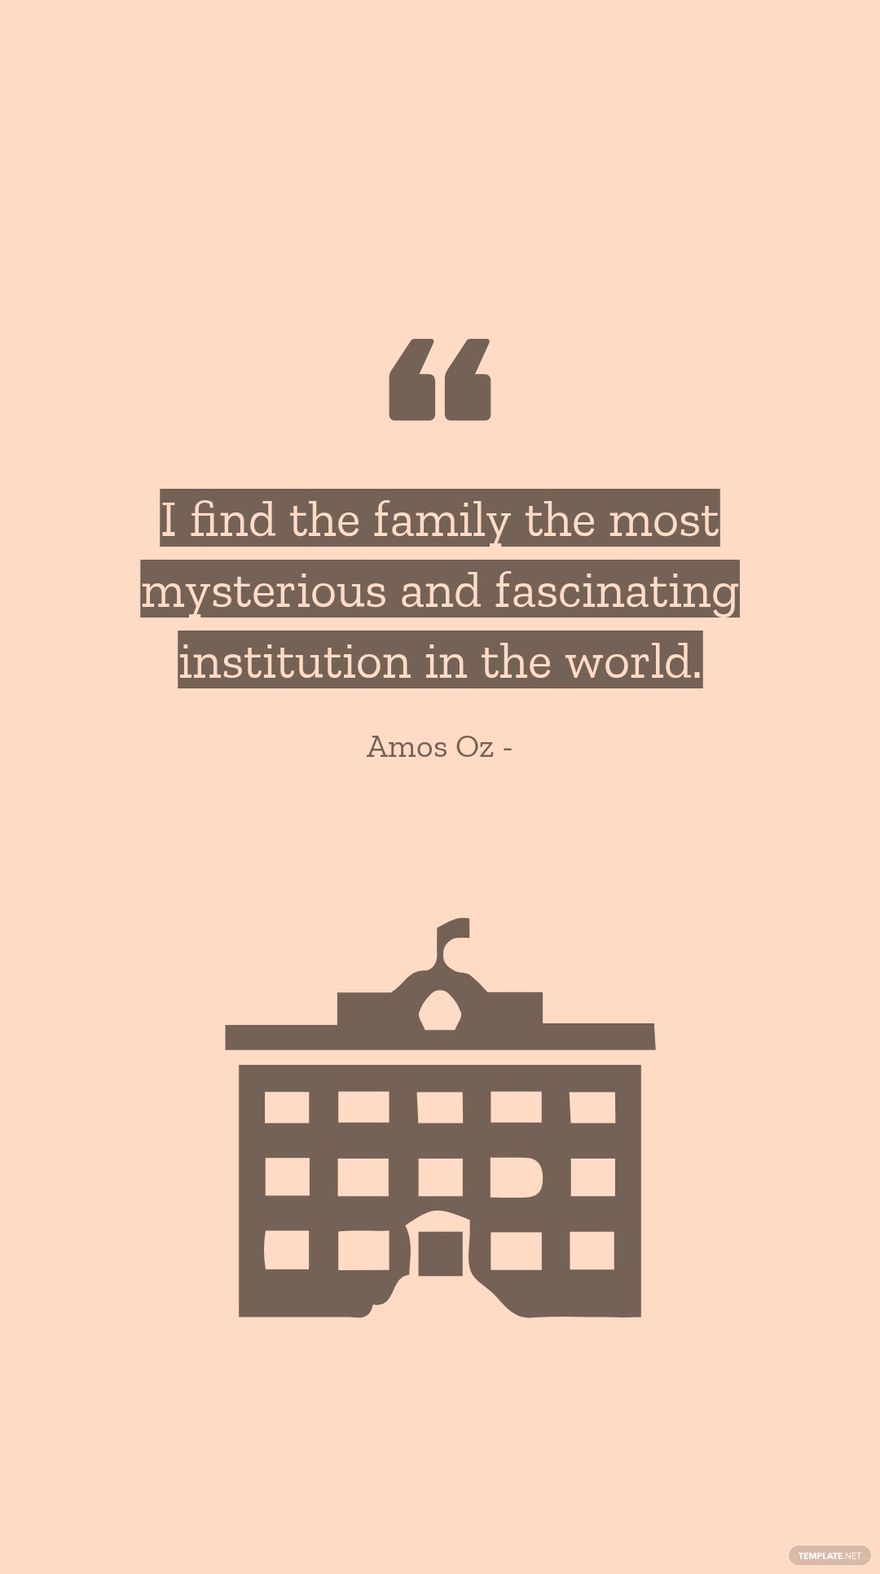 Amos Oz - I find the family the most mysterious and fascinating institution in the world.